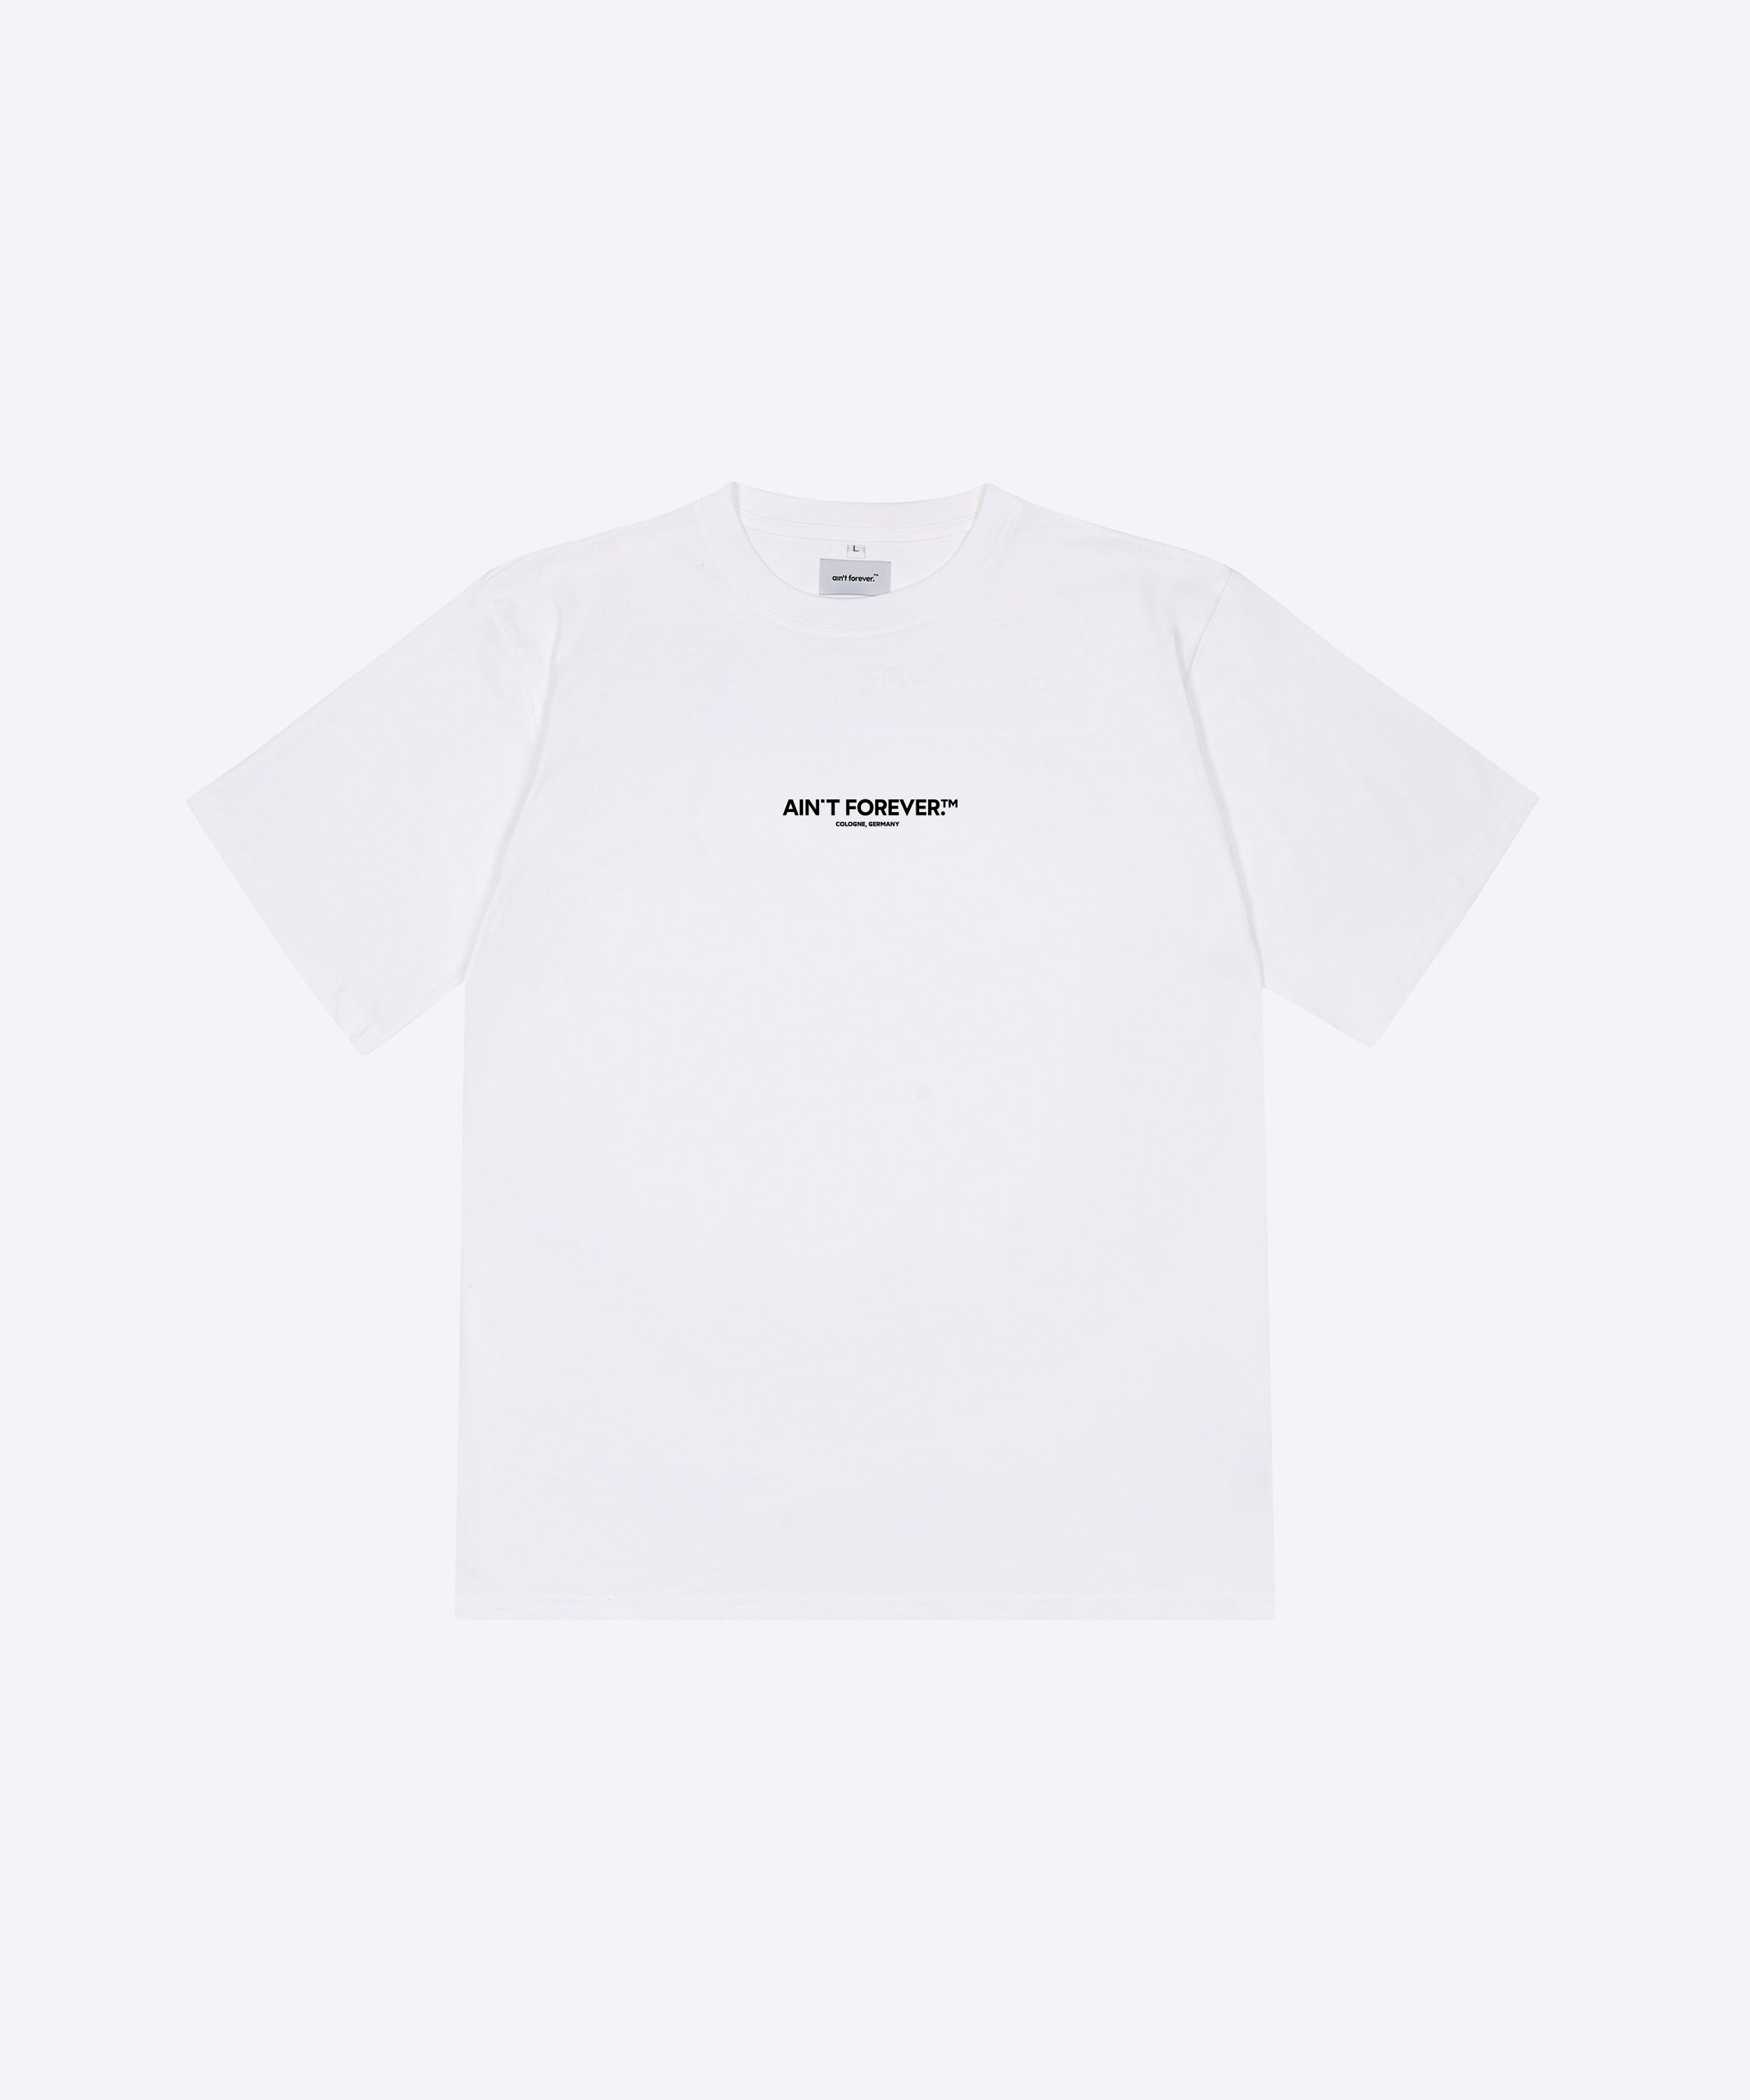 THE DEPARTURES T-SHIRT (WHITE / BLACK)